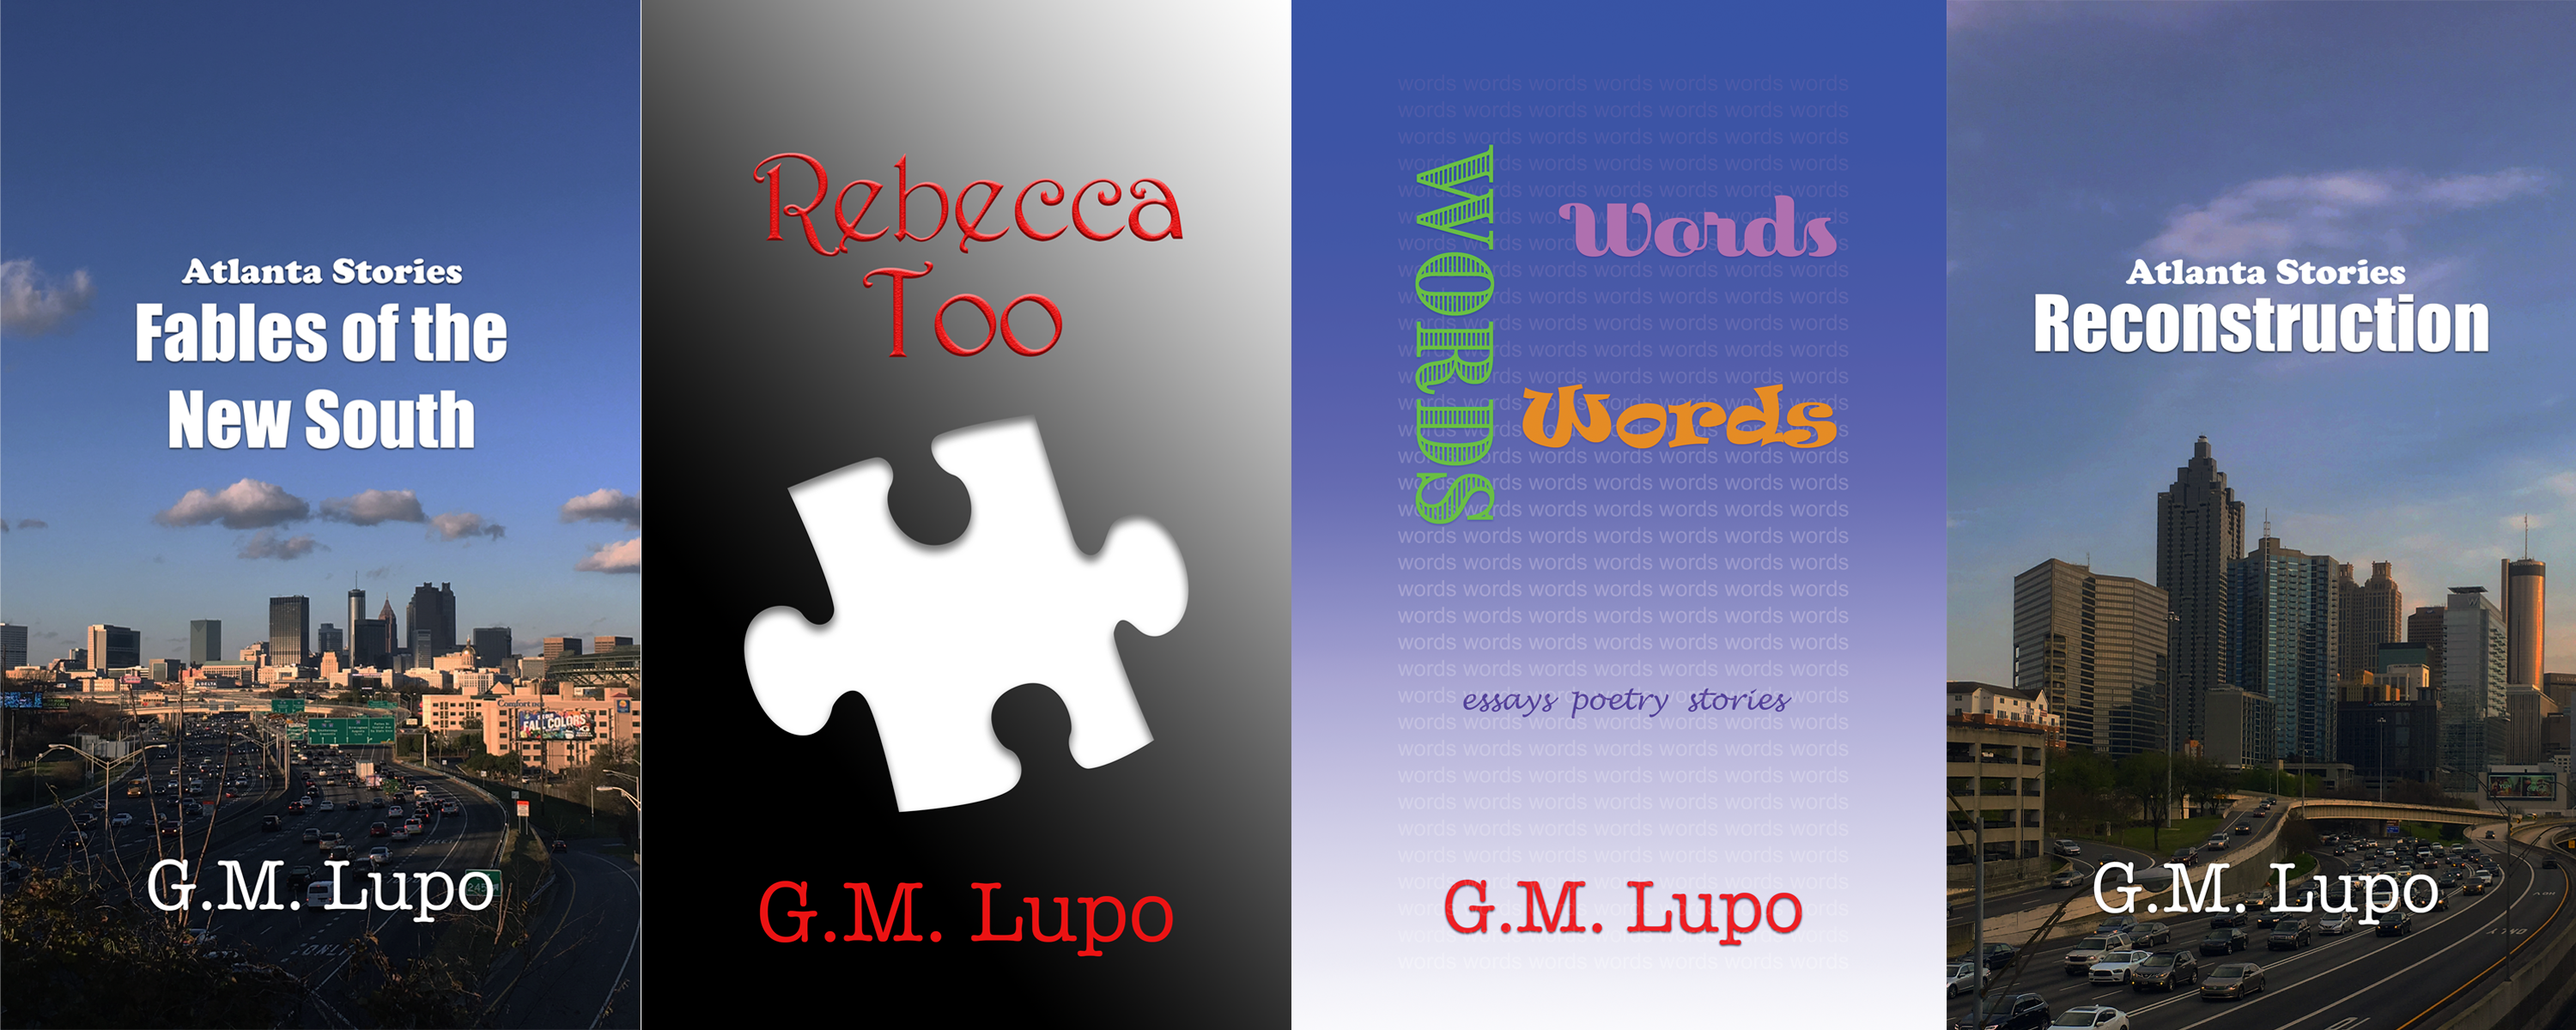 Books by G.M. Lupo